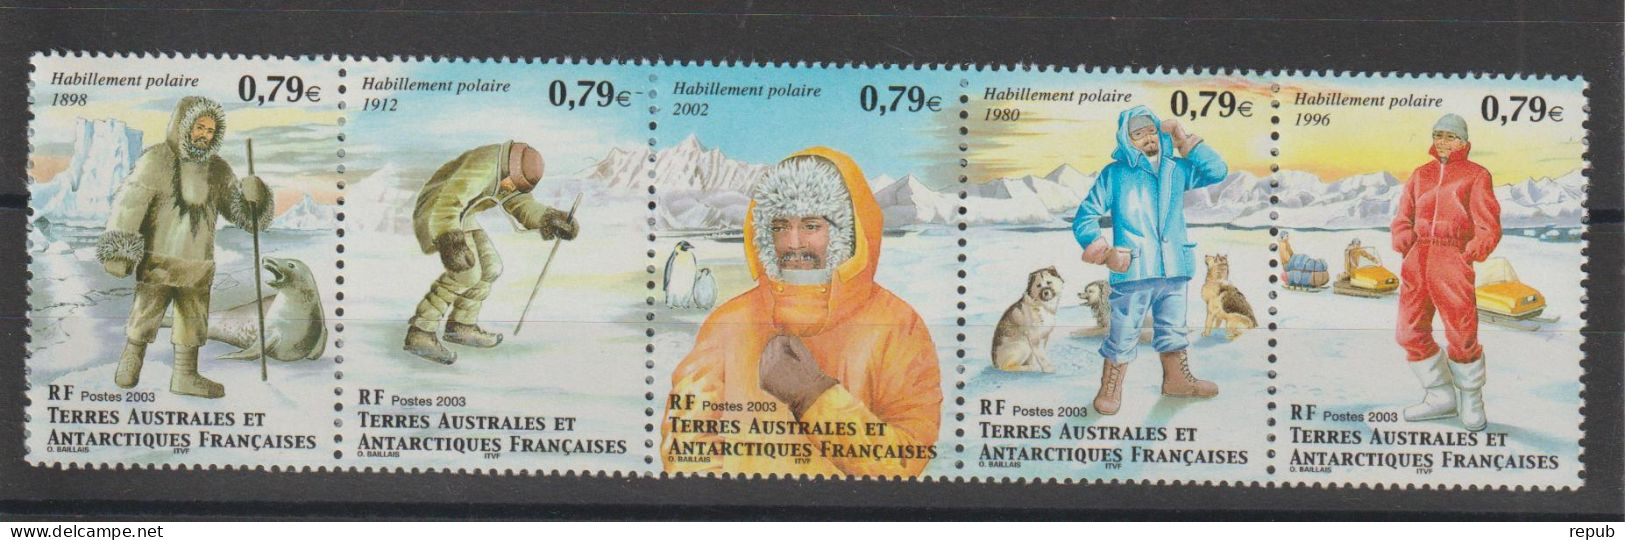 TAAF 2003 Timbres Issus Du Carnet, 352-356, 5 Val ** MNH - Ungebraucht